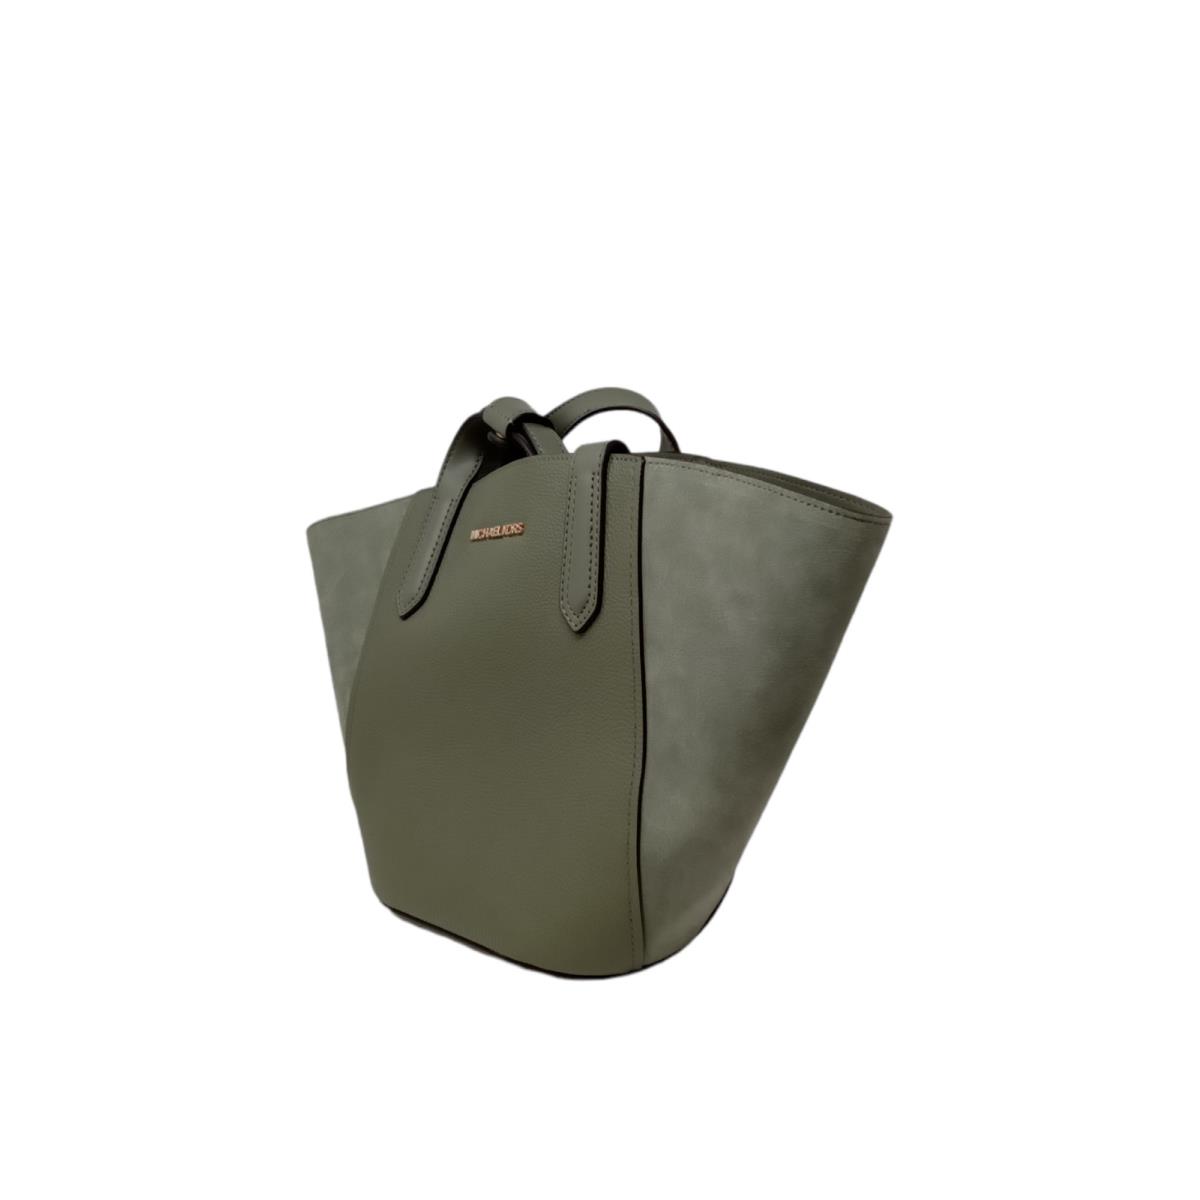 Michael Kors Portia Small Tote Army Green Leather